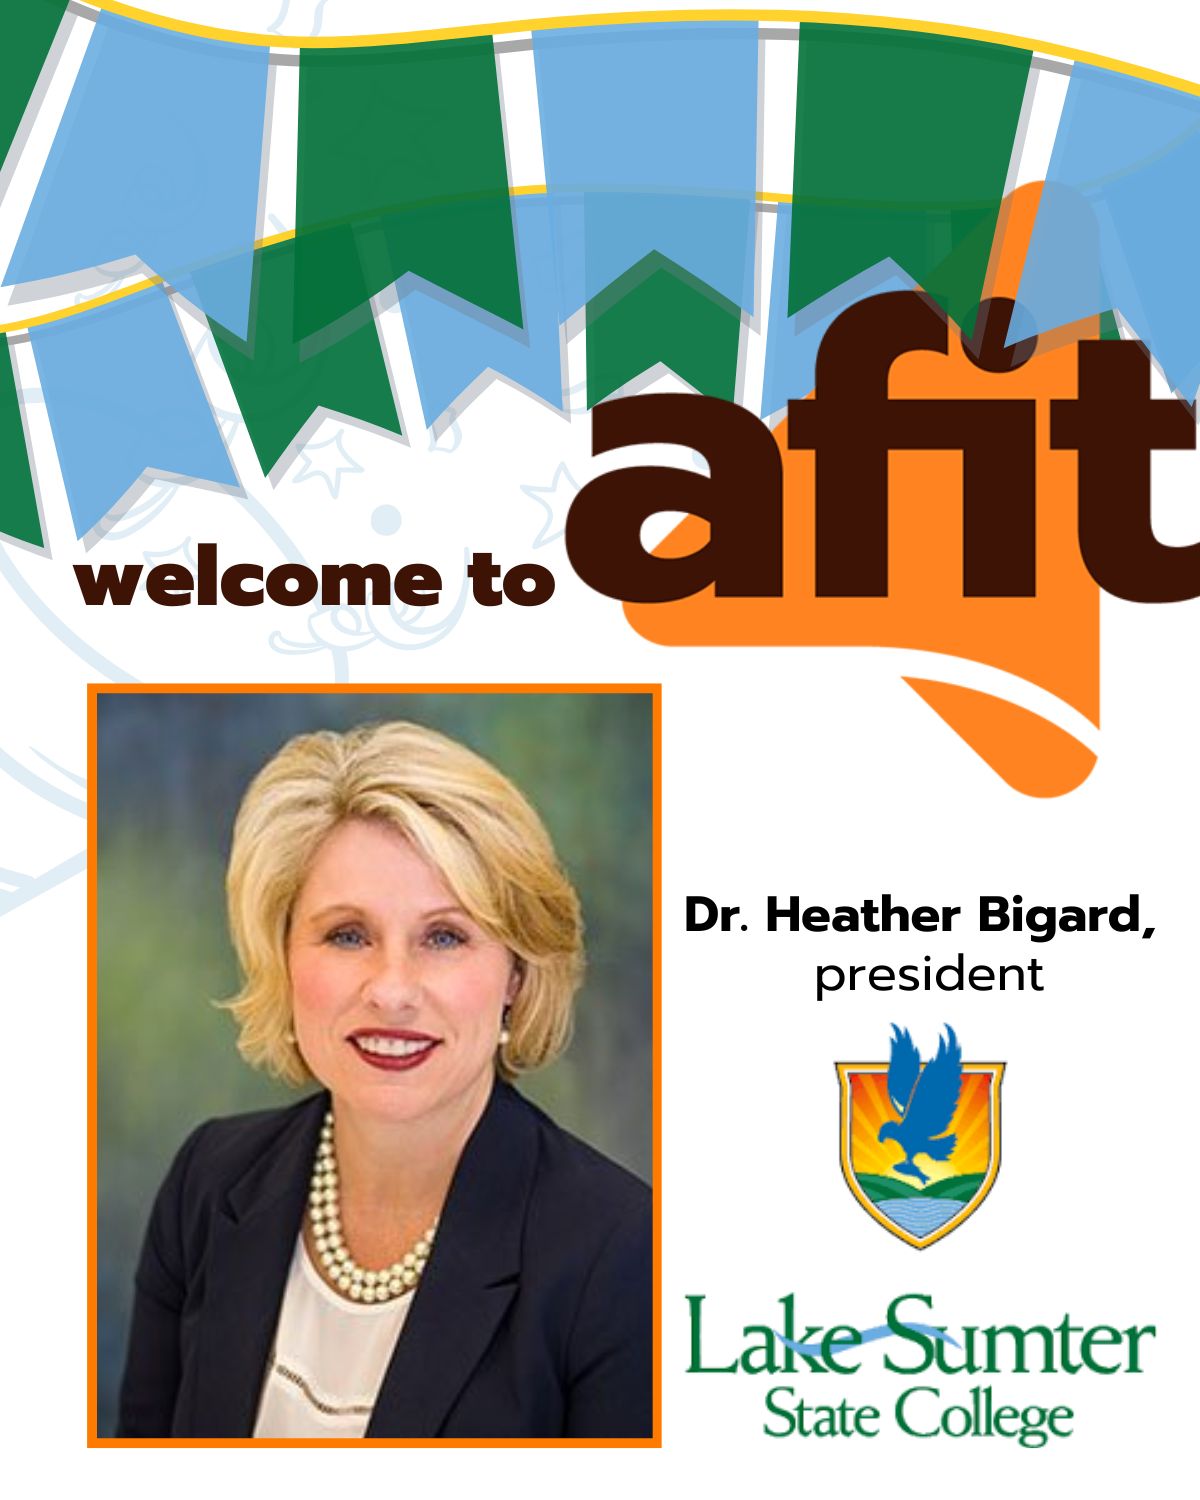 AFIT Welcomes Dr. Heather Bigard, president of Lake-Sumter State College 